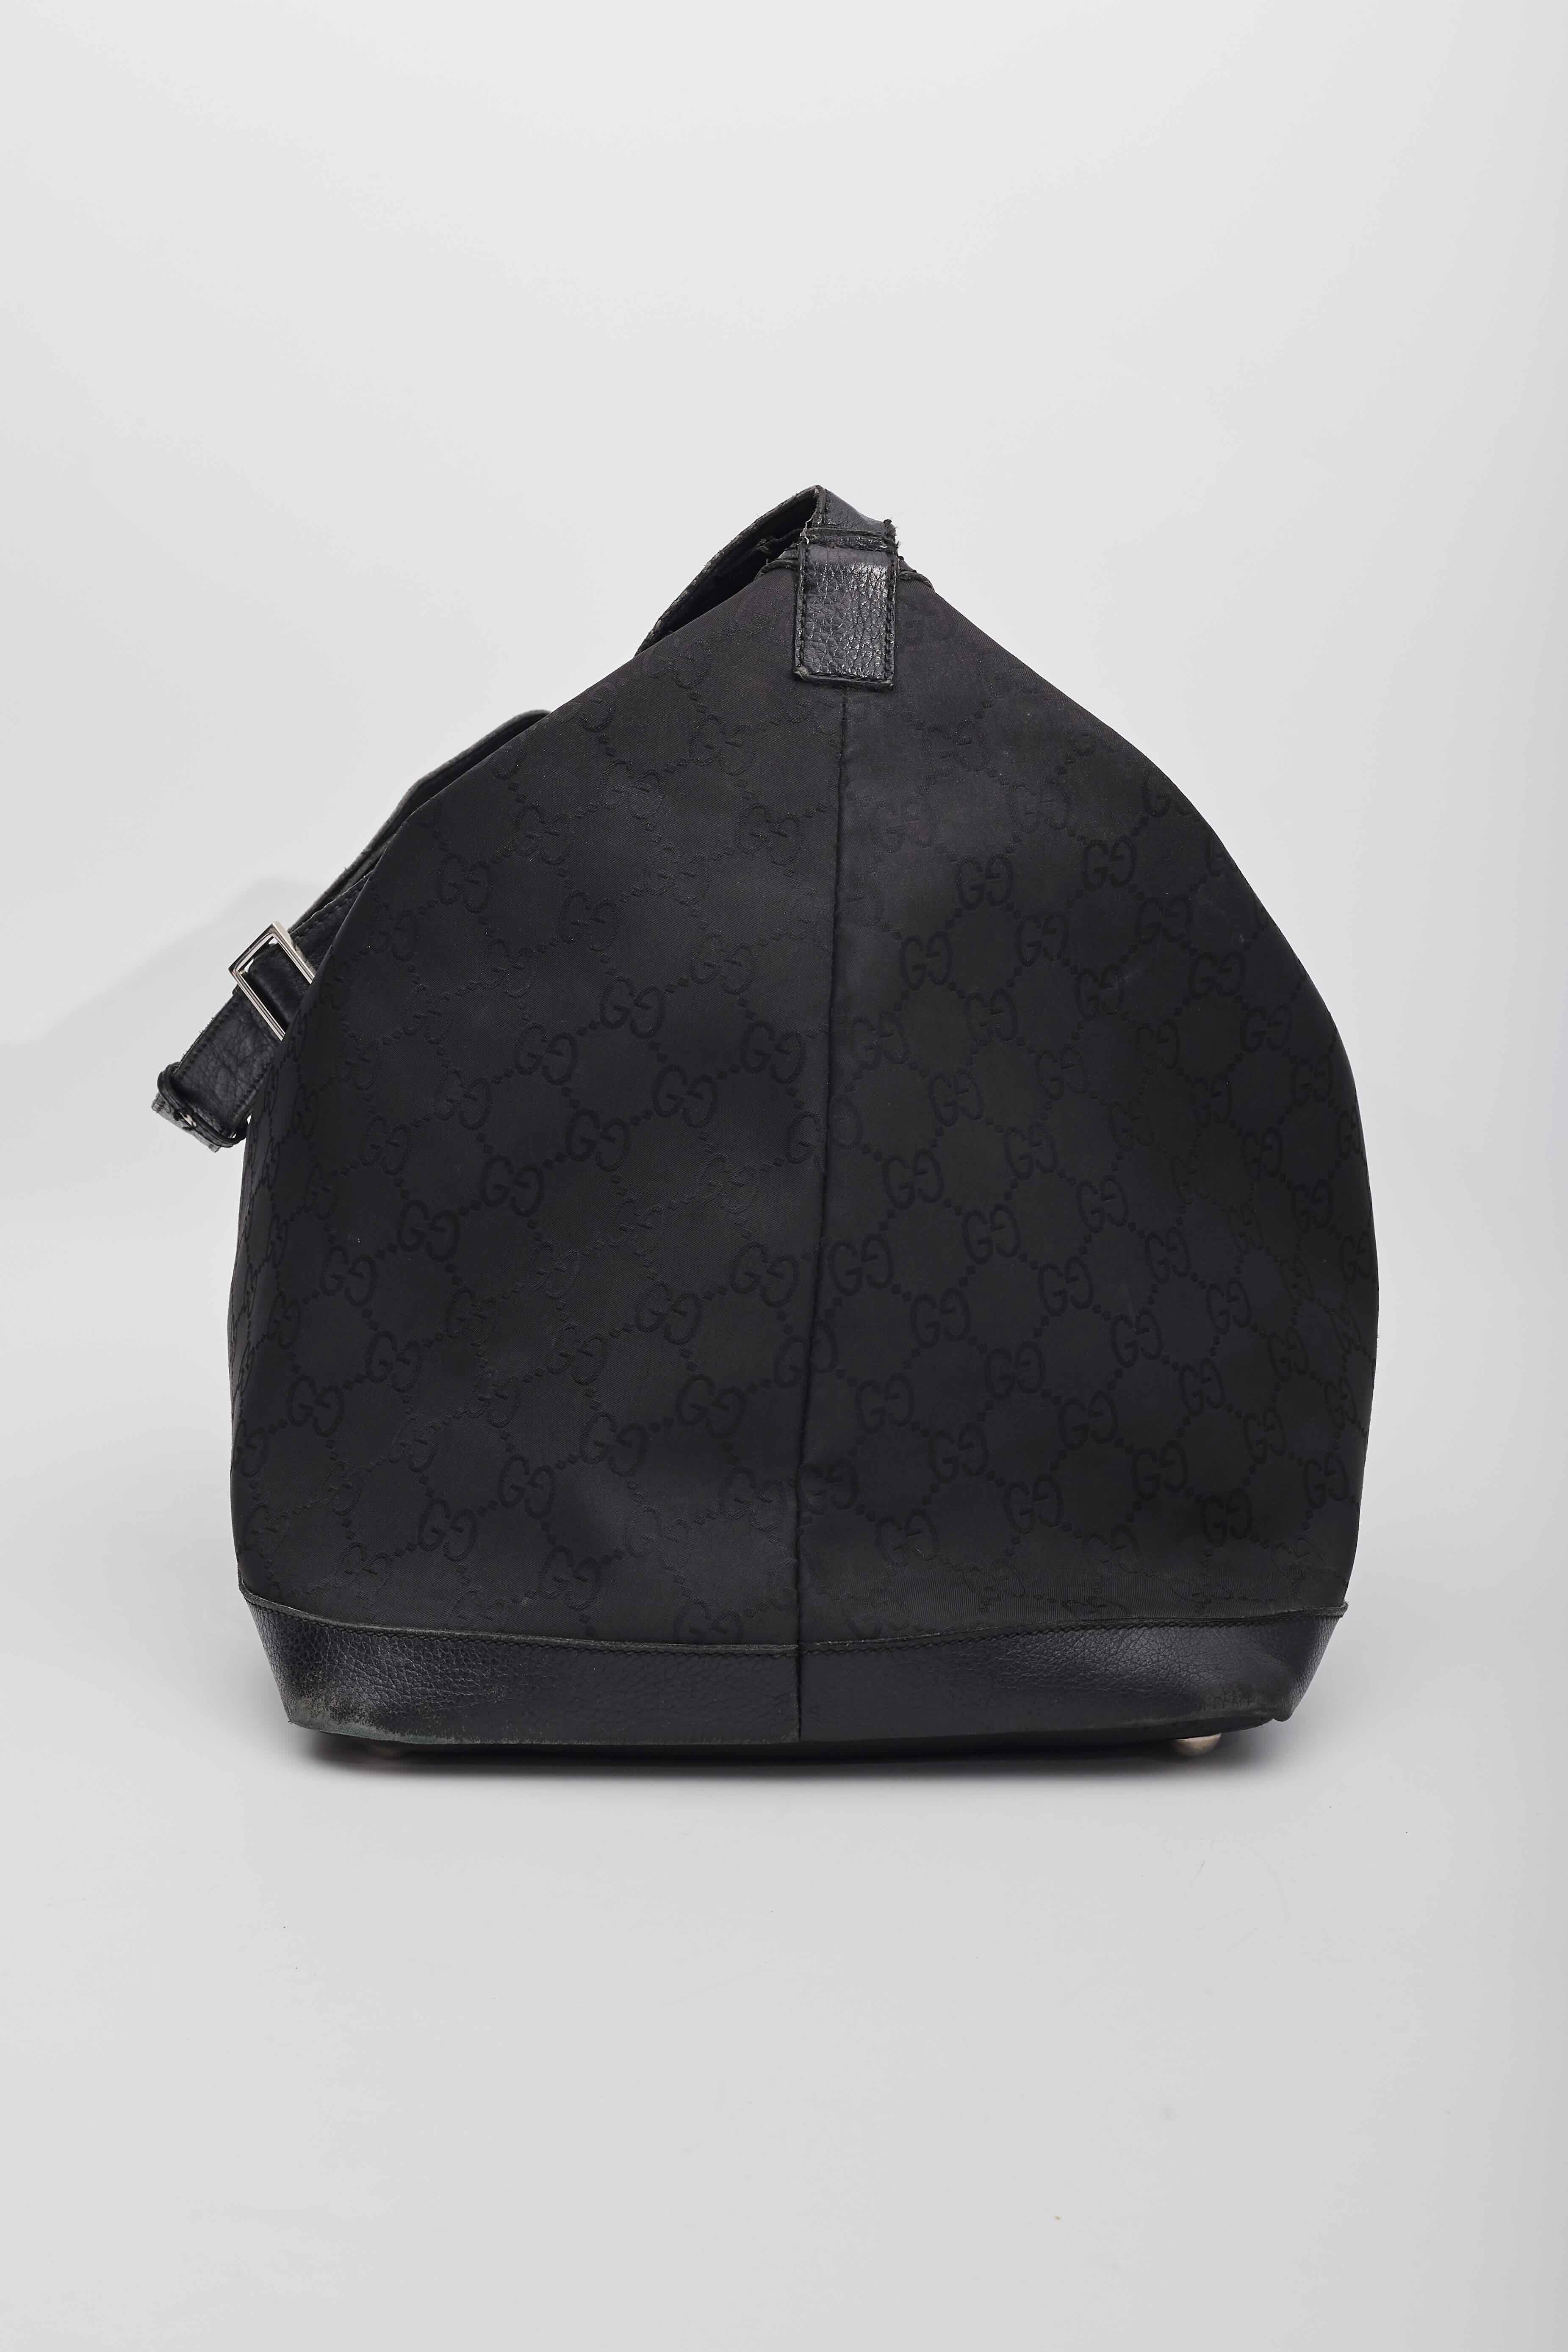 Gucci Nylon Black Monogram Hobo 48hr Travel Bag Large  In Good Condition For Sale In Montreal, Quebec